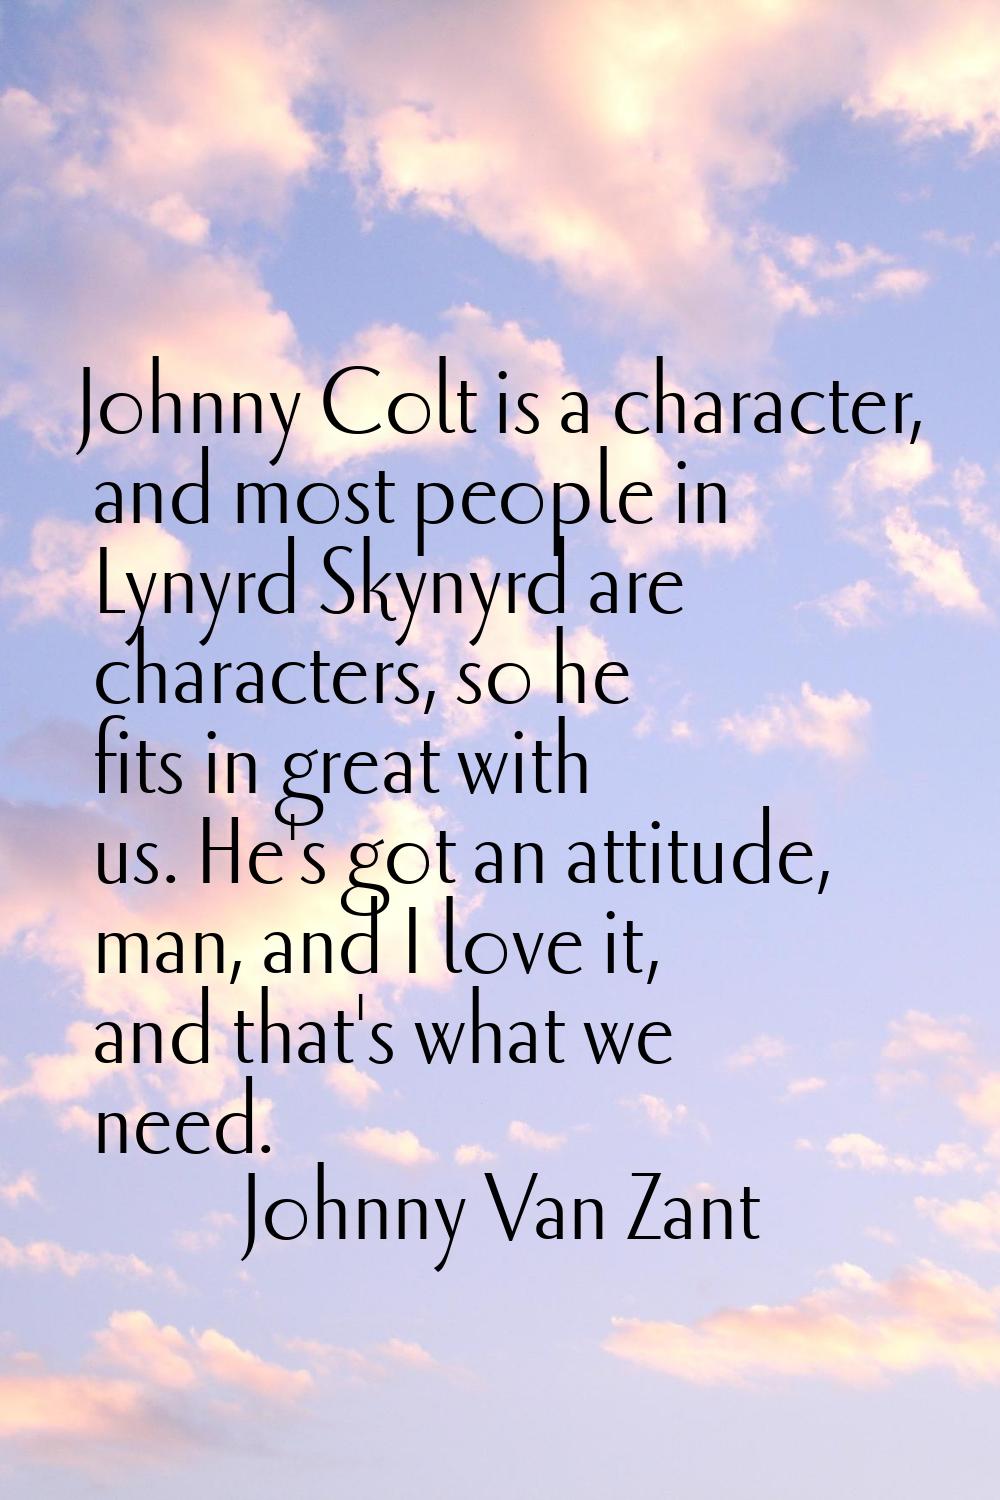 Johnny Colt is a character, and most people in Lynyrd Skynyrd are characters, so he fits in great w